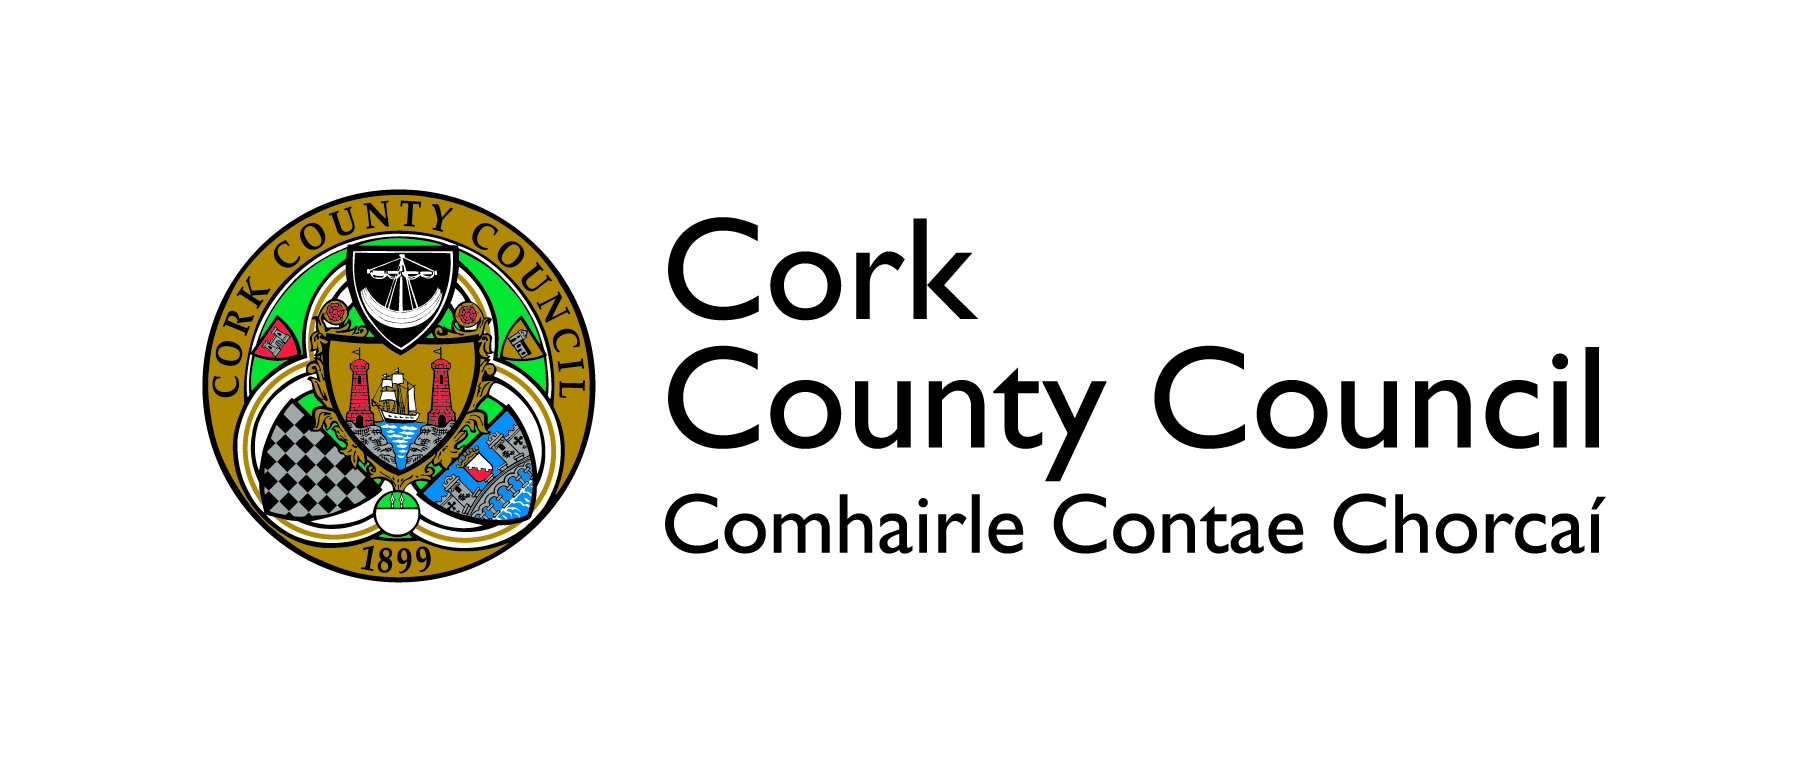 Cork County Council approved 2022 Annual Budget of €372m